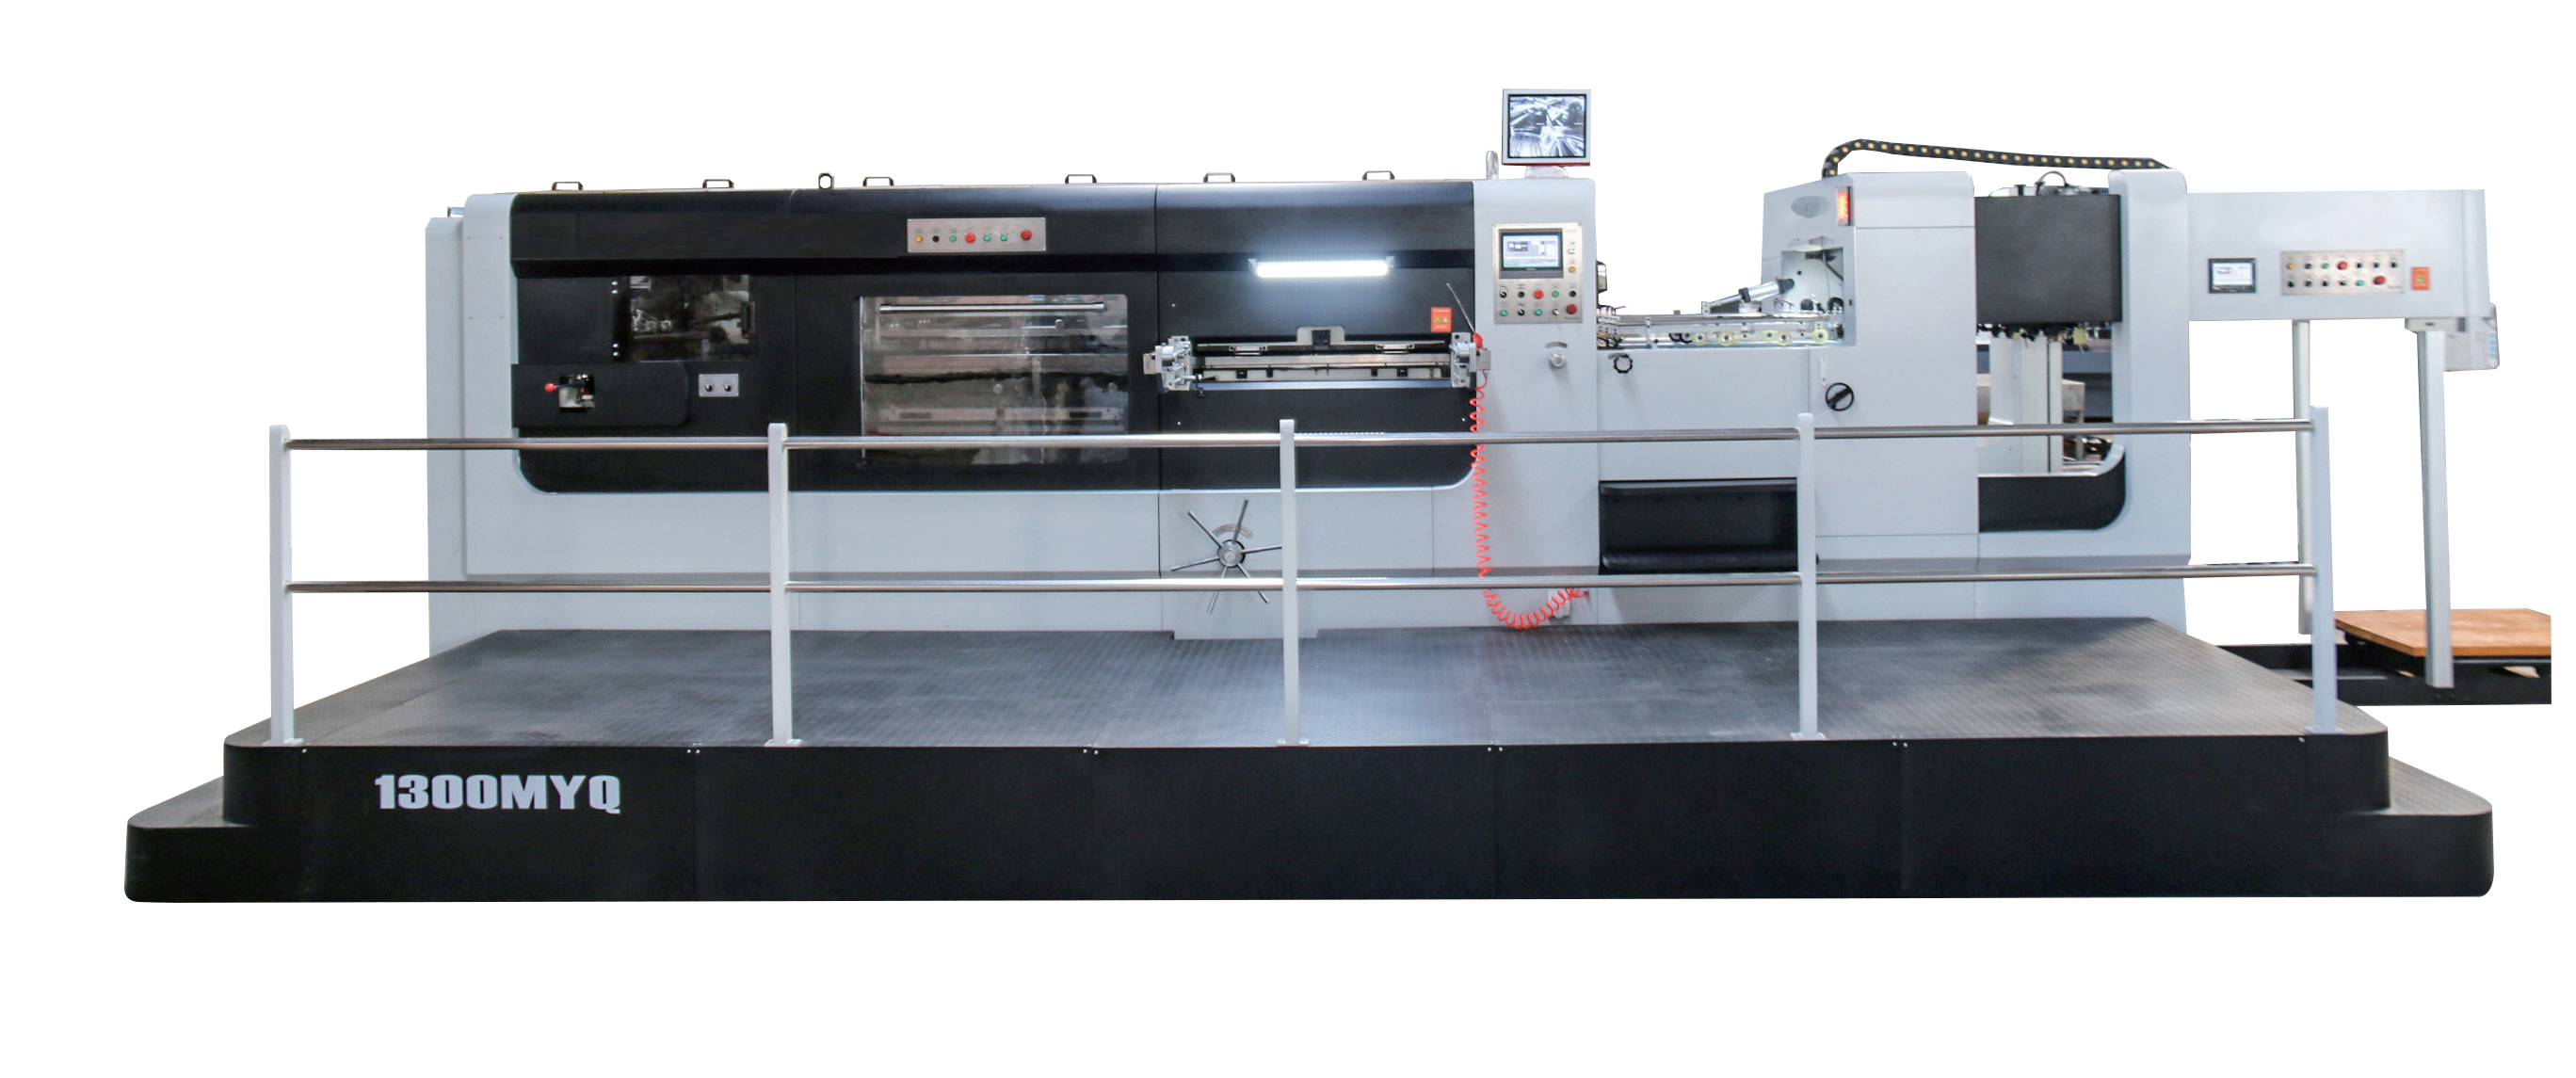 MYQ1300 Automatic die cutting and creasing machine with stripping unit 